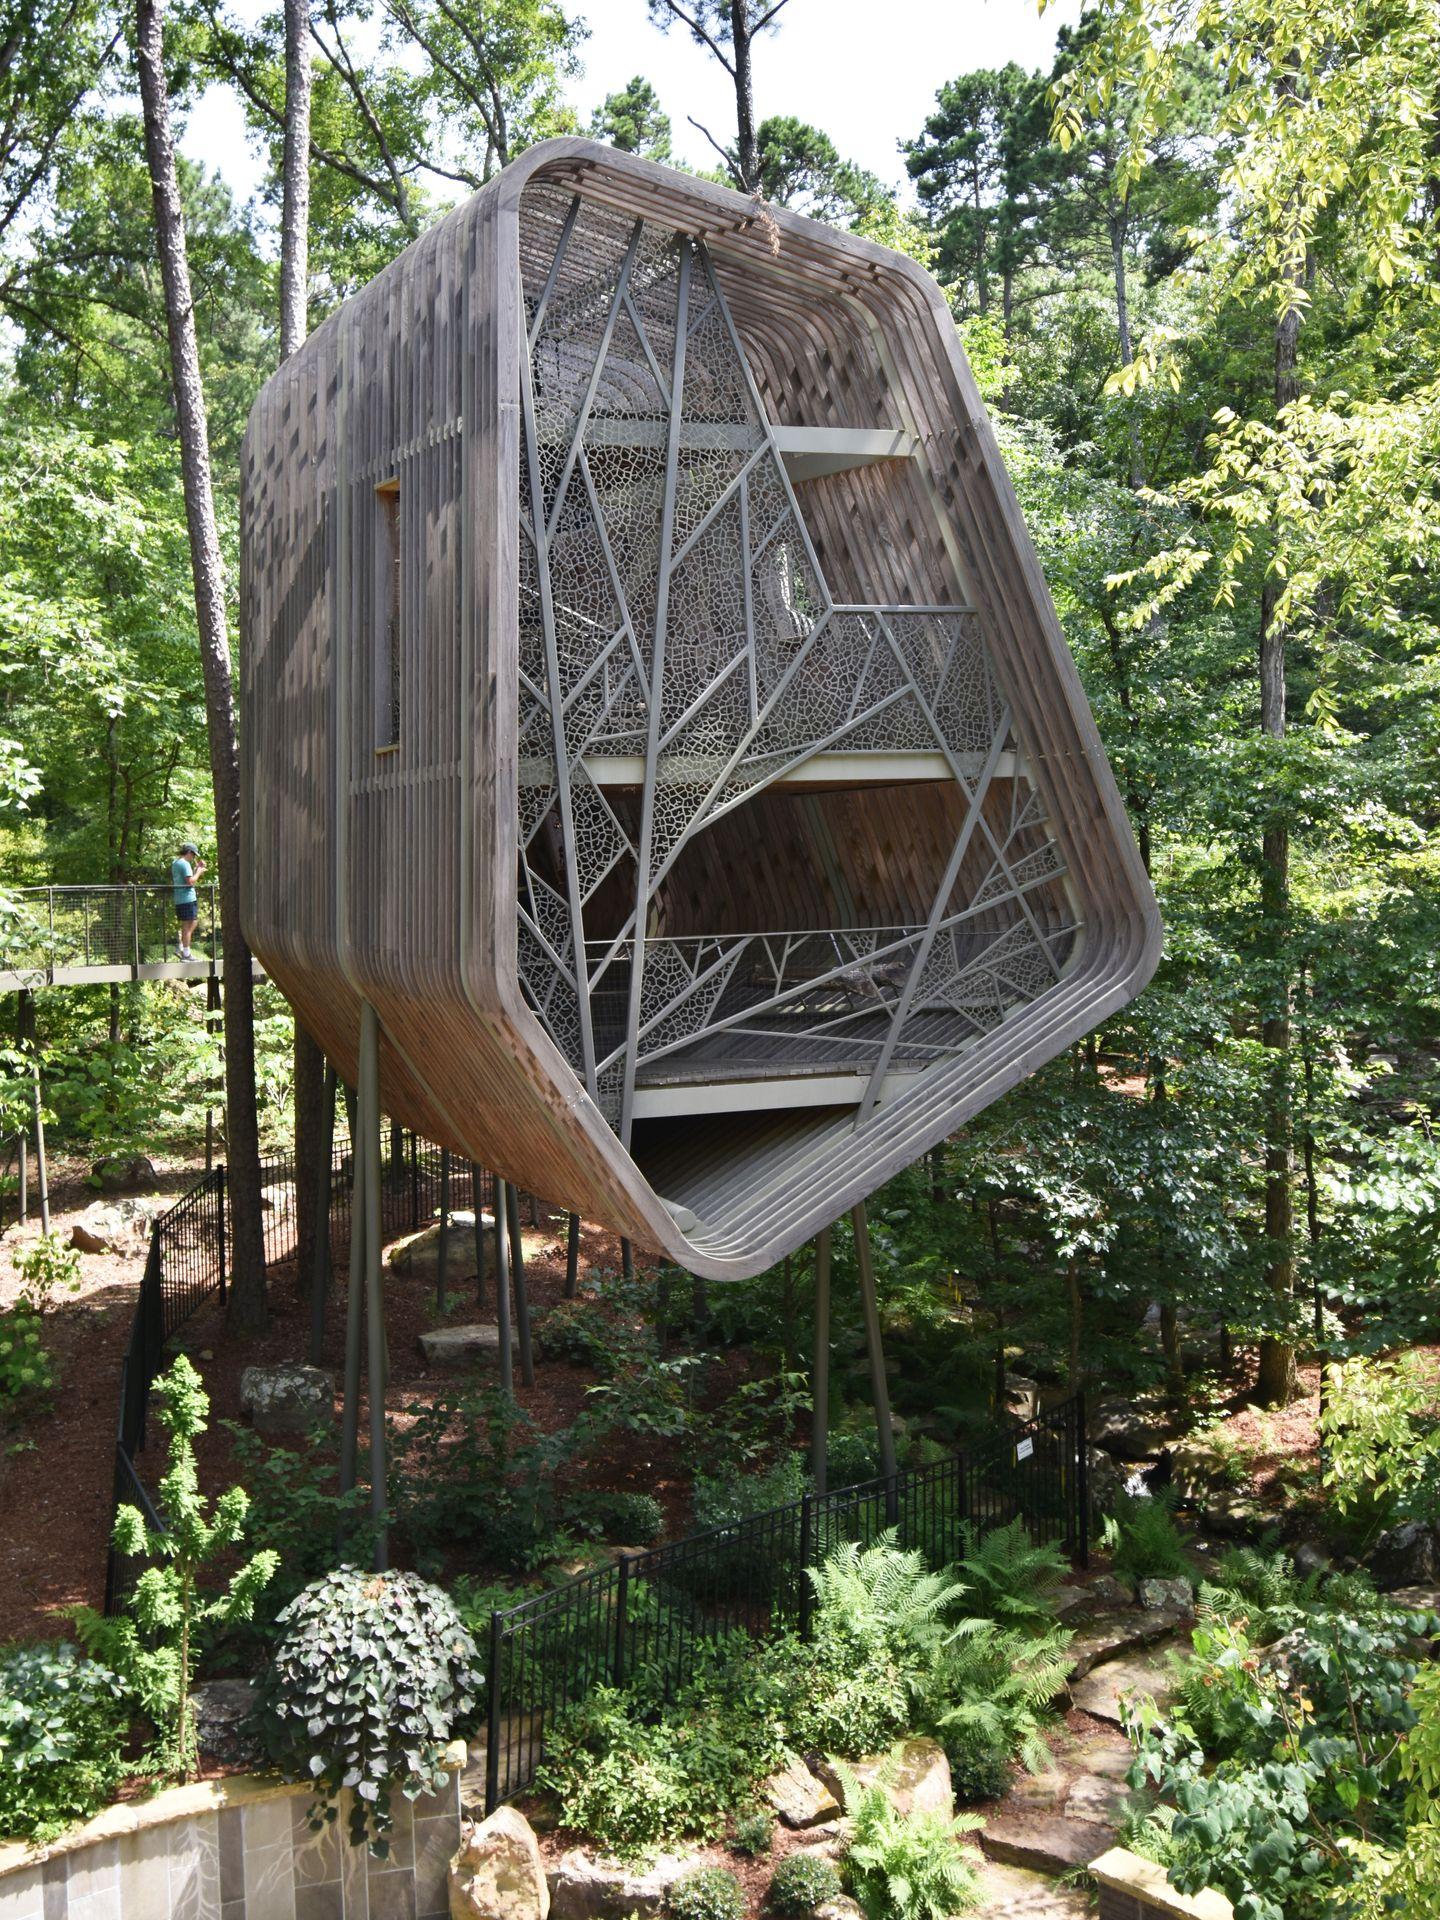 A unique treehouse inside of Garvan Woodland Gardens. The treehouse has an organic shape and there is a geometric design on the exterior.